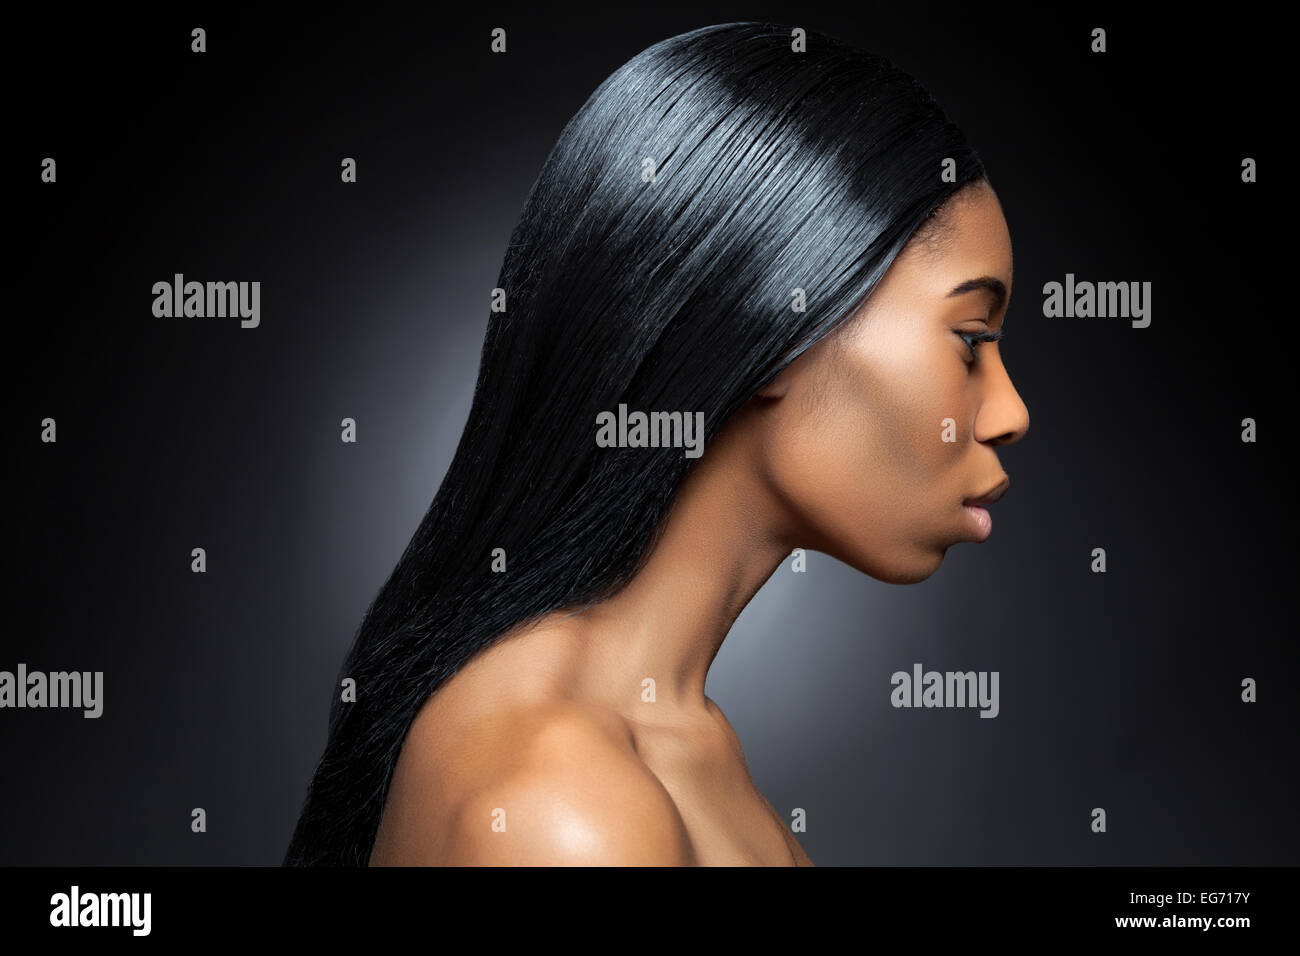 Profile Of Black Woman Stock Photo, Picture and Royalty Free Image. Image  33804575.